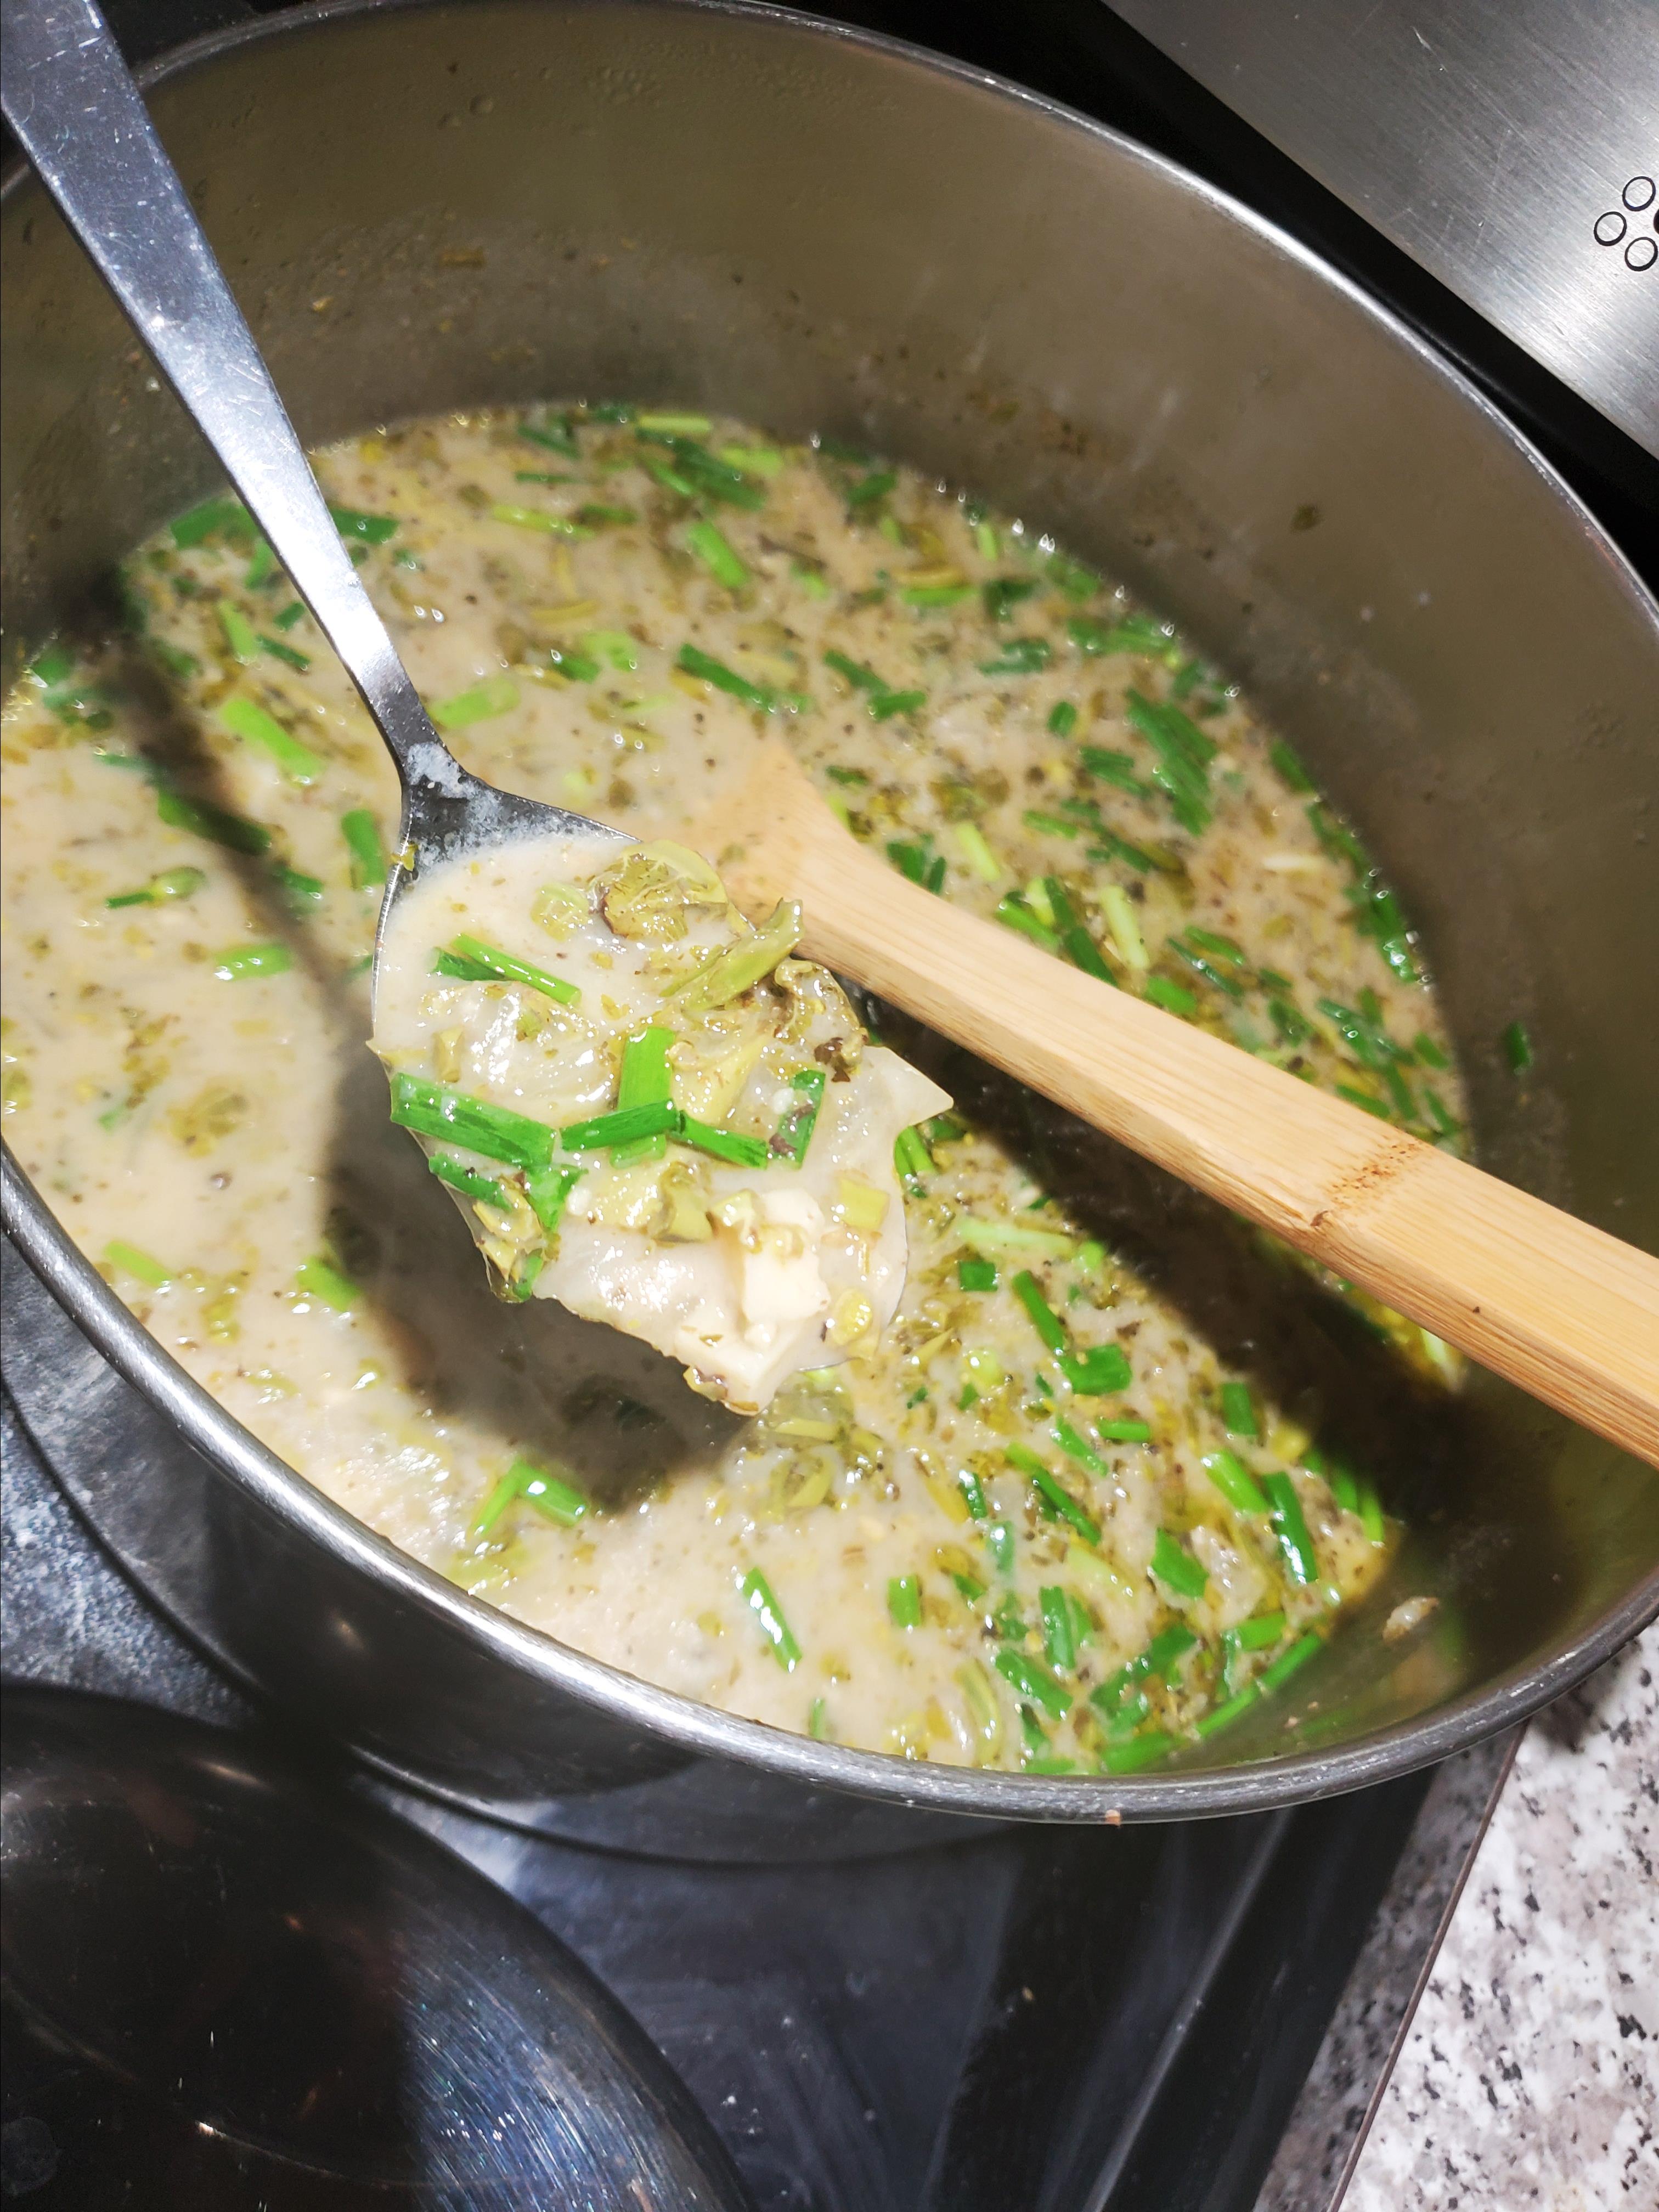 <p>Enjoy fiddleheads in this creamy soup, which is reminiscent of cream of asparagus soup. It's a fantastic way to enjoy fiddleheads as an appetizer or light meal. "Absolutely mouth wateringly delicious! You need to try this recipe before fiddlehead season is over. You won't regret it," urges reviewer Chanelle.</p>
                          